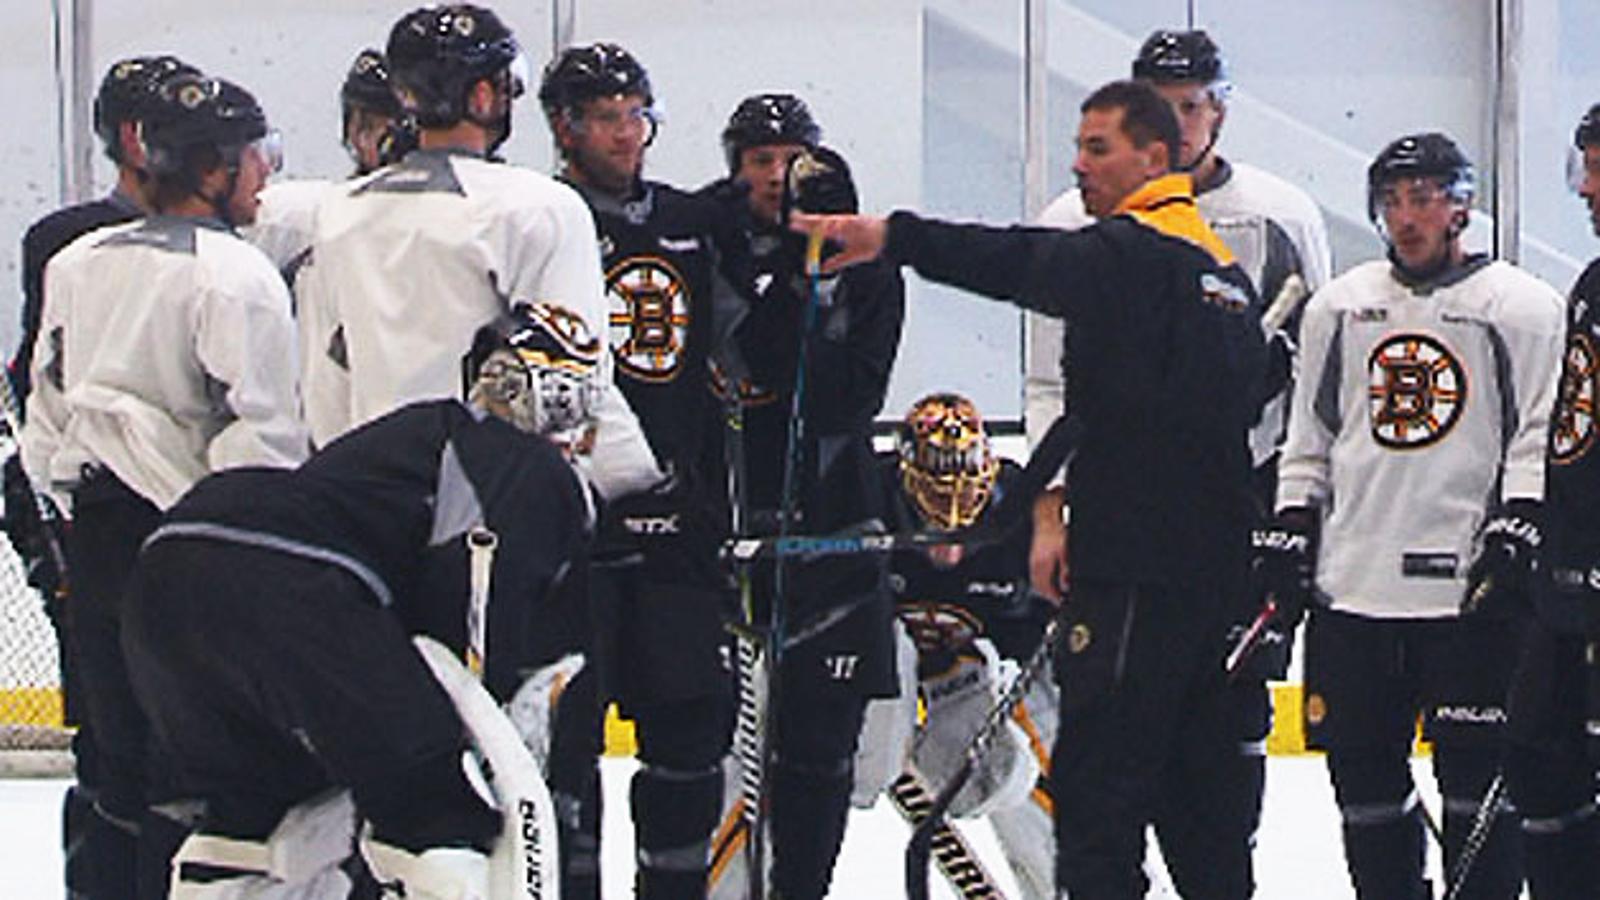 Bruins coach Cassidy flips out at his players during today’s practice 